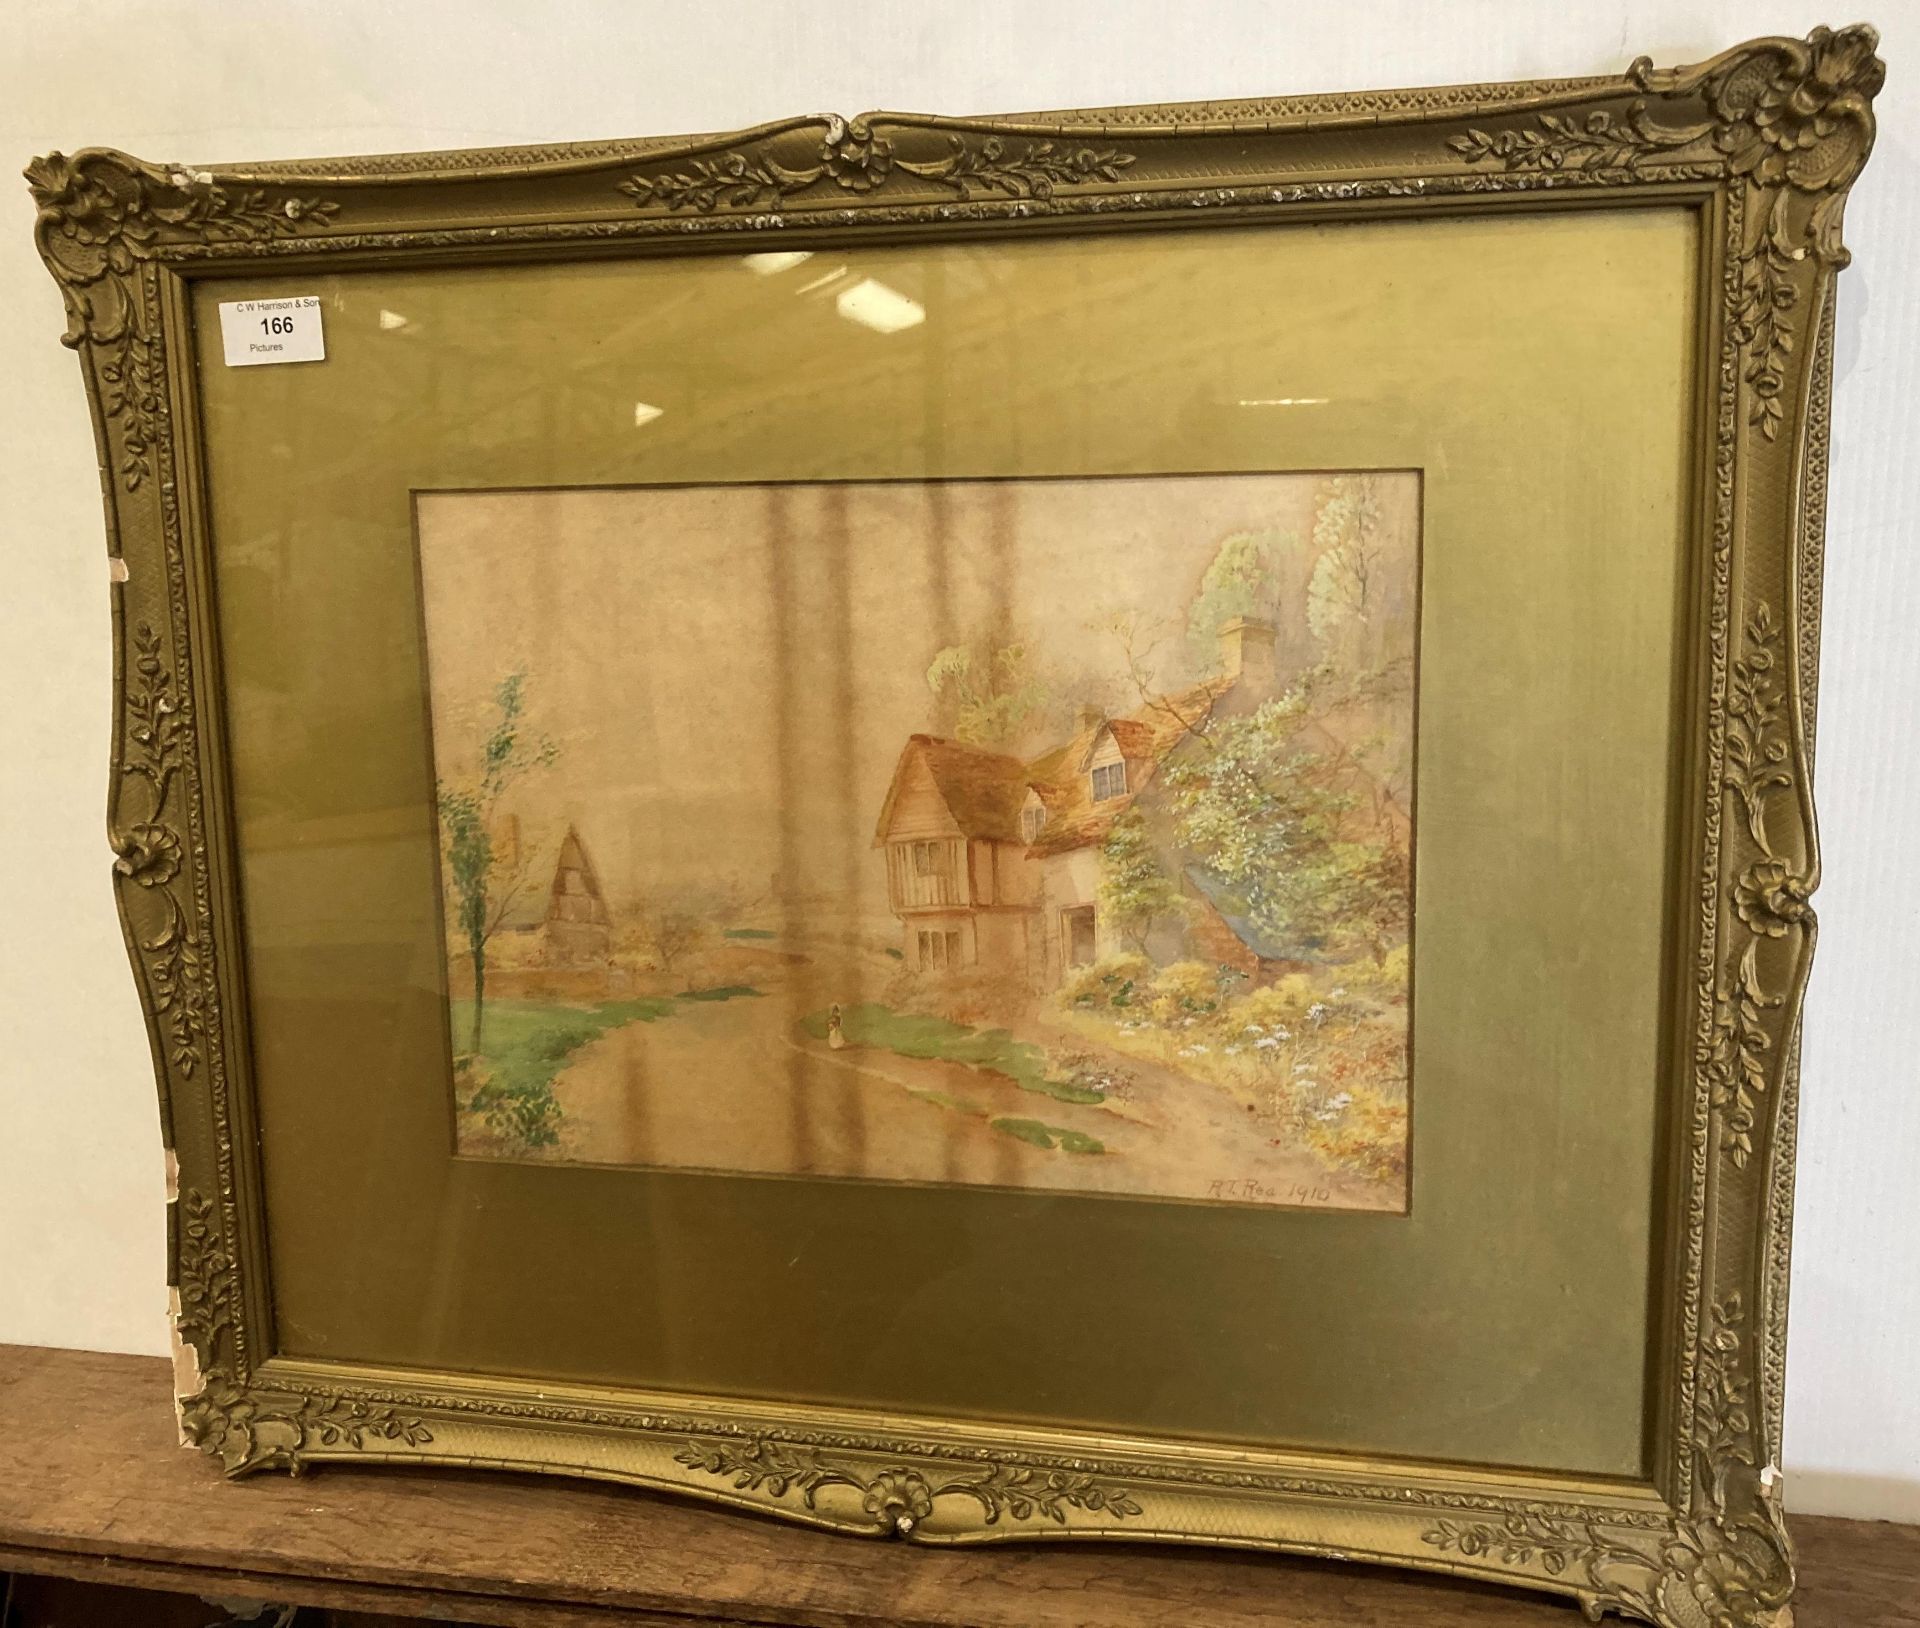 RT Rea (1910) watercolour in ornate gilt frame (with damage) 'Girl on a Country Lane' 25cm x 33cm,